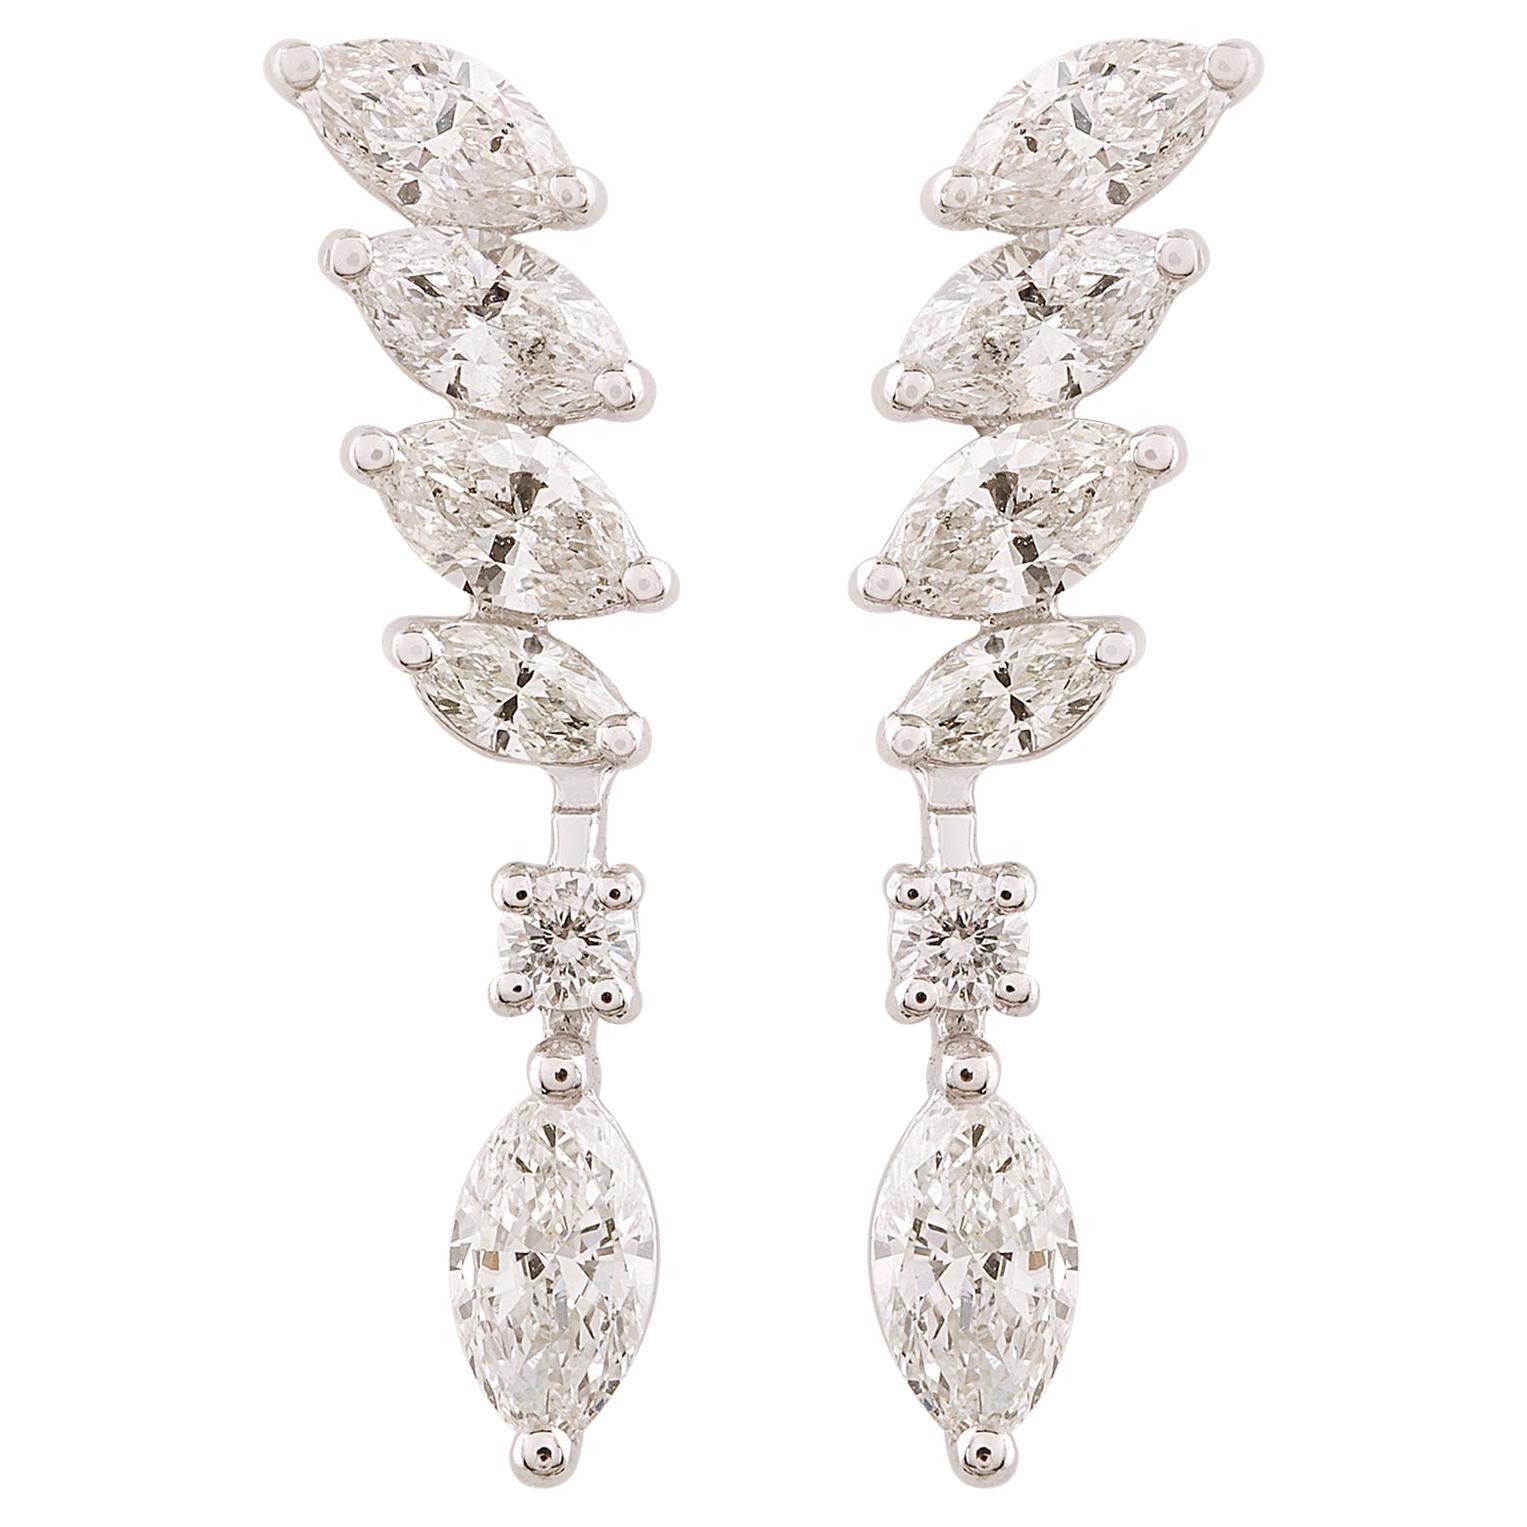 1.60 Carat SI Clarity HI Color Marquise Diamond Earrings 18 Karat White Gold For Sale